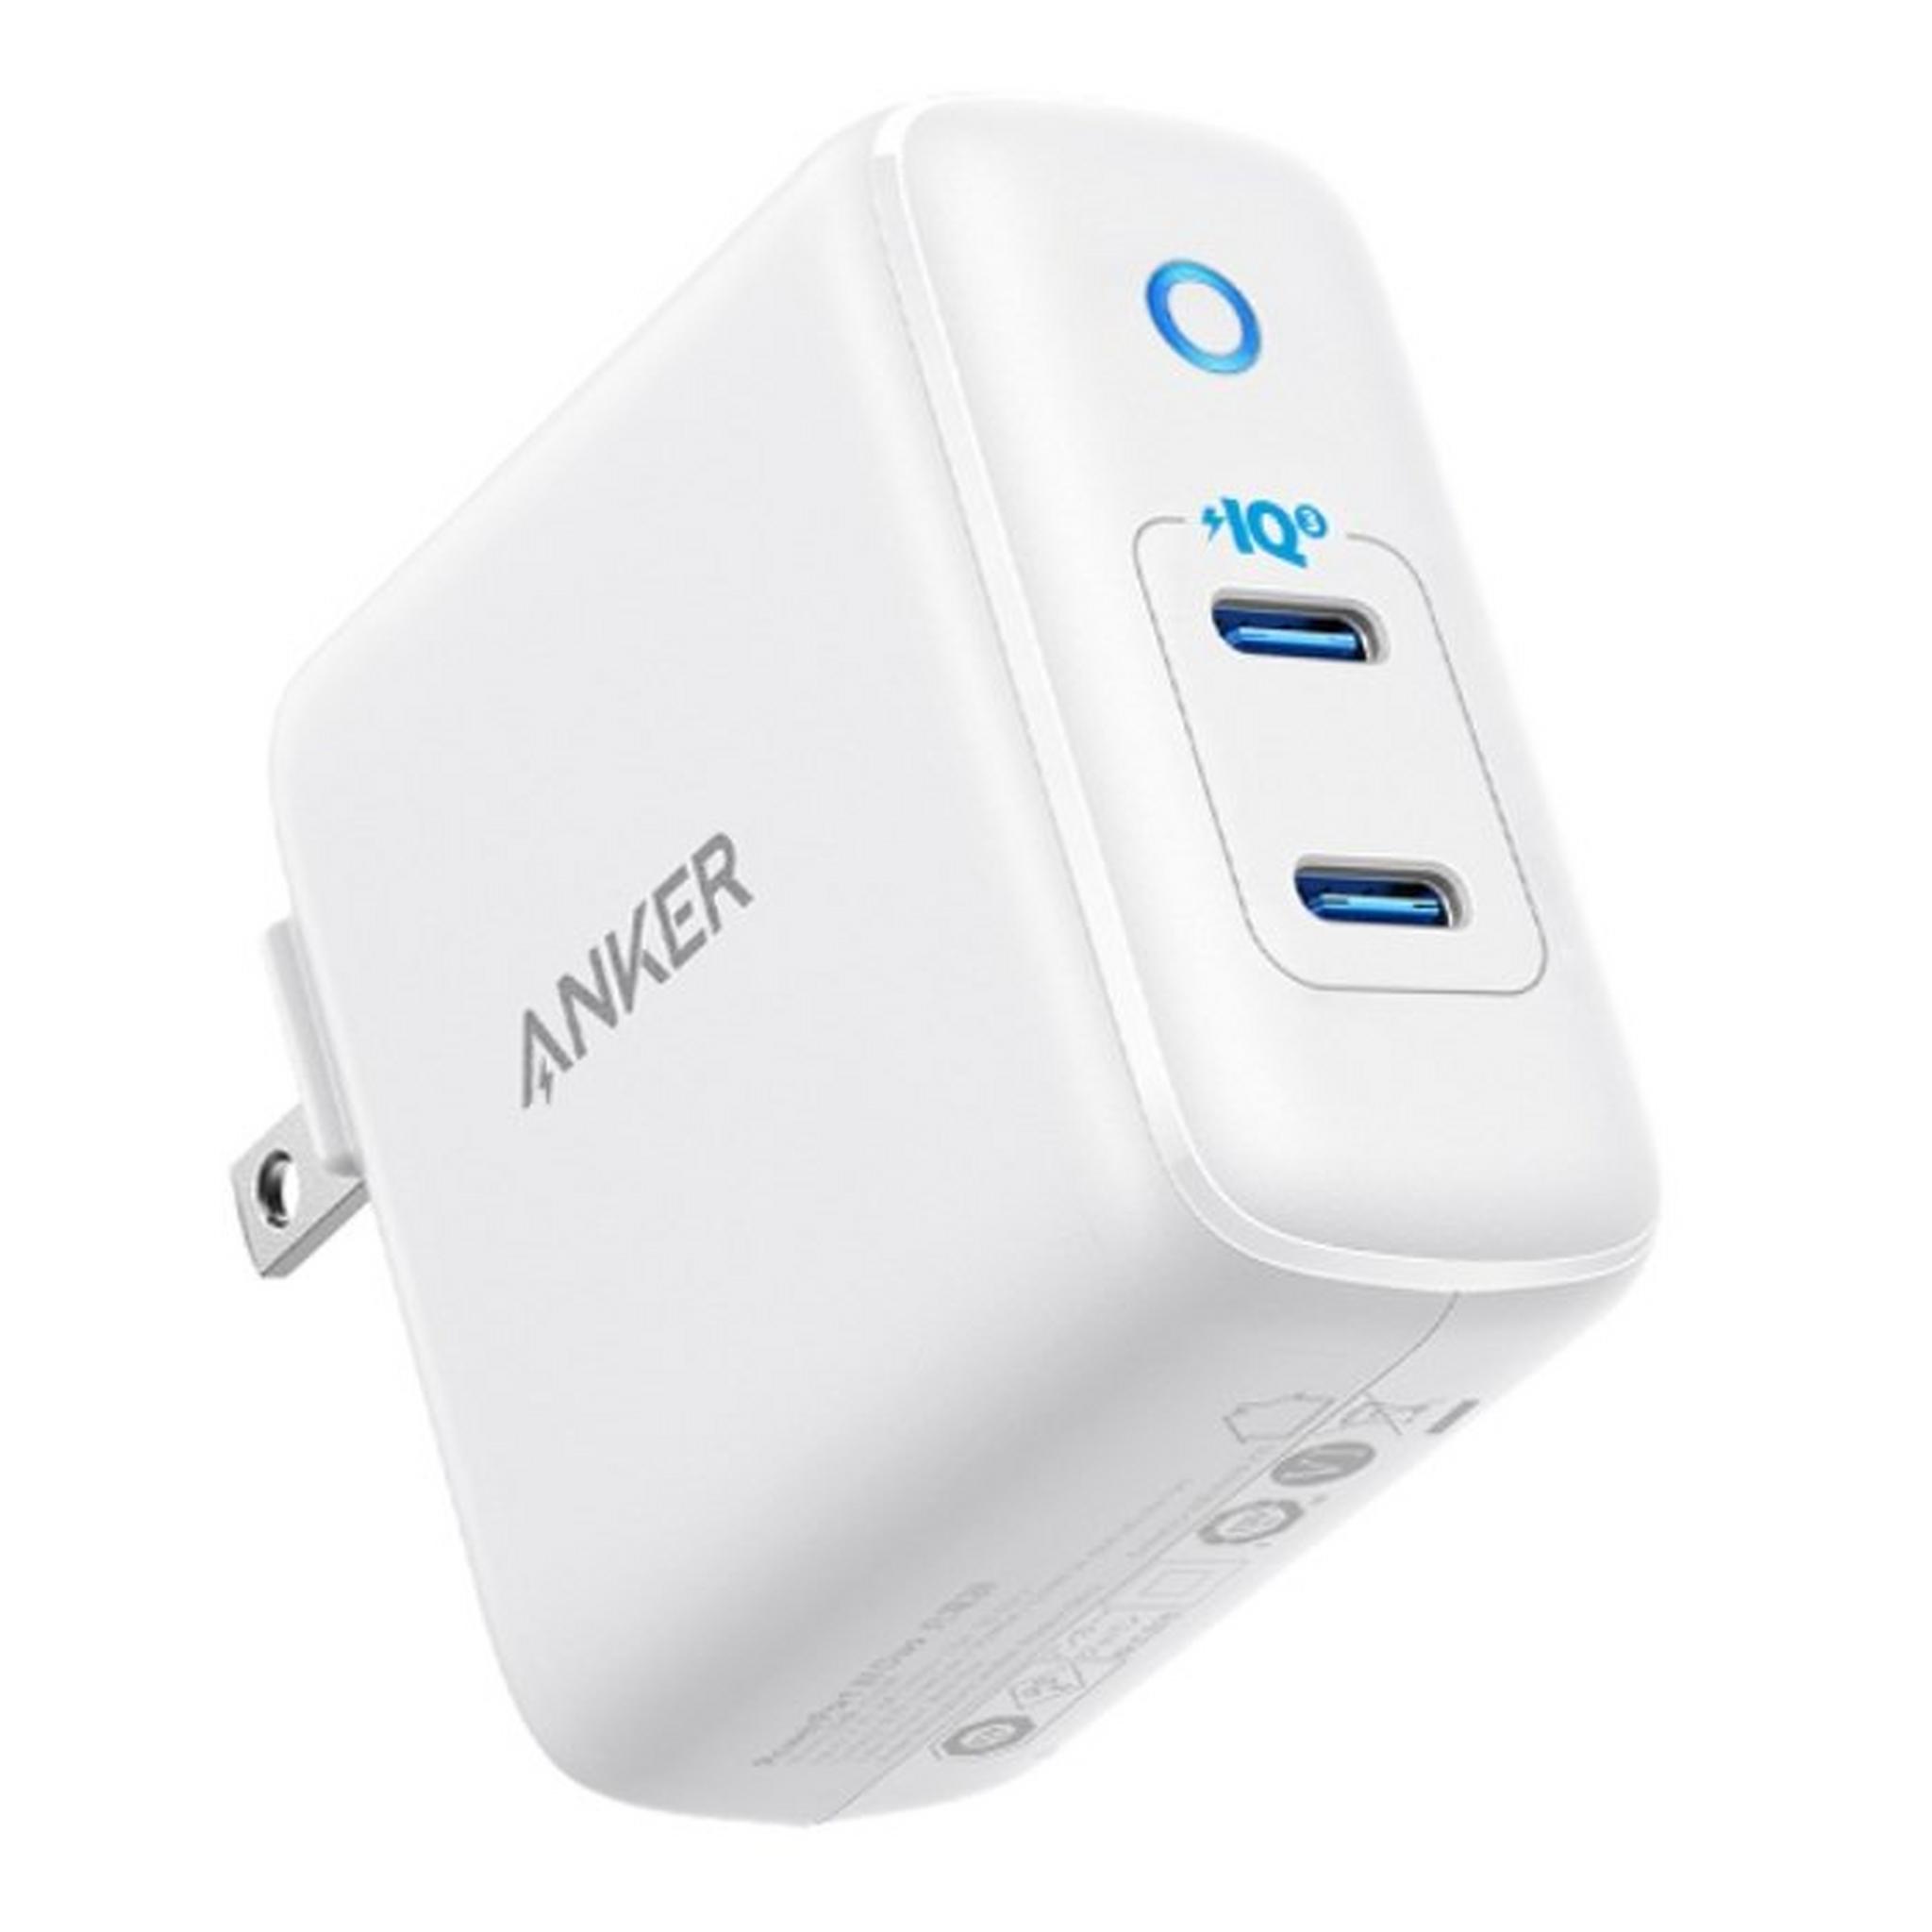 Anker PowerPort III Duo 40W Wall Charger - White